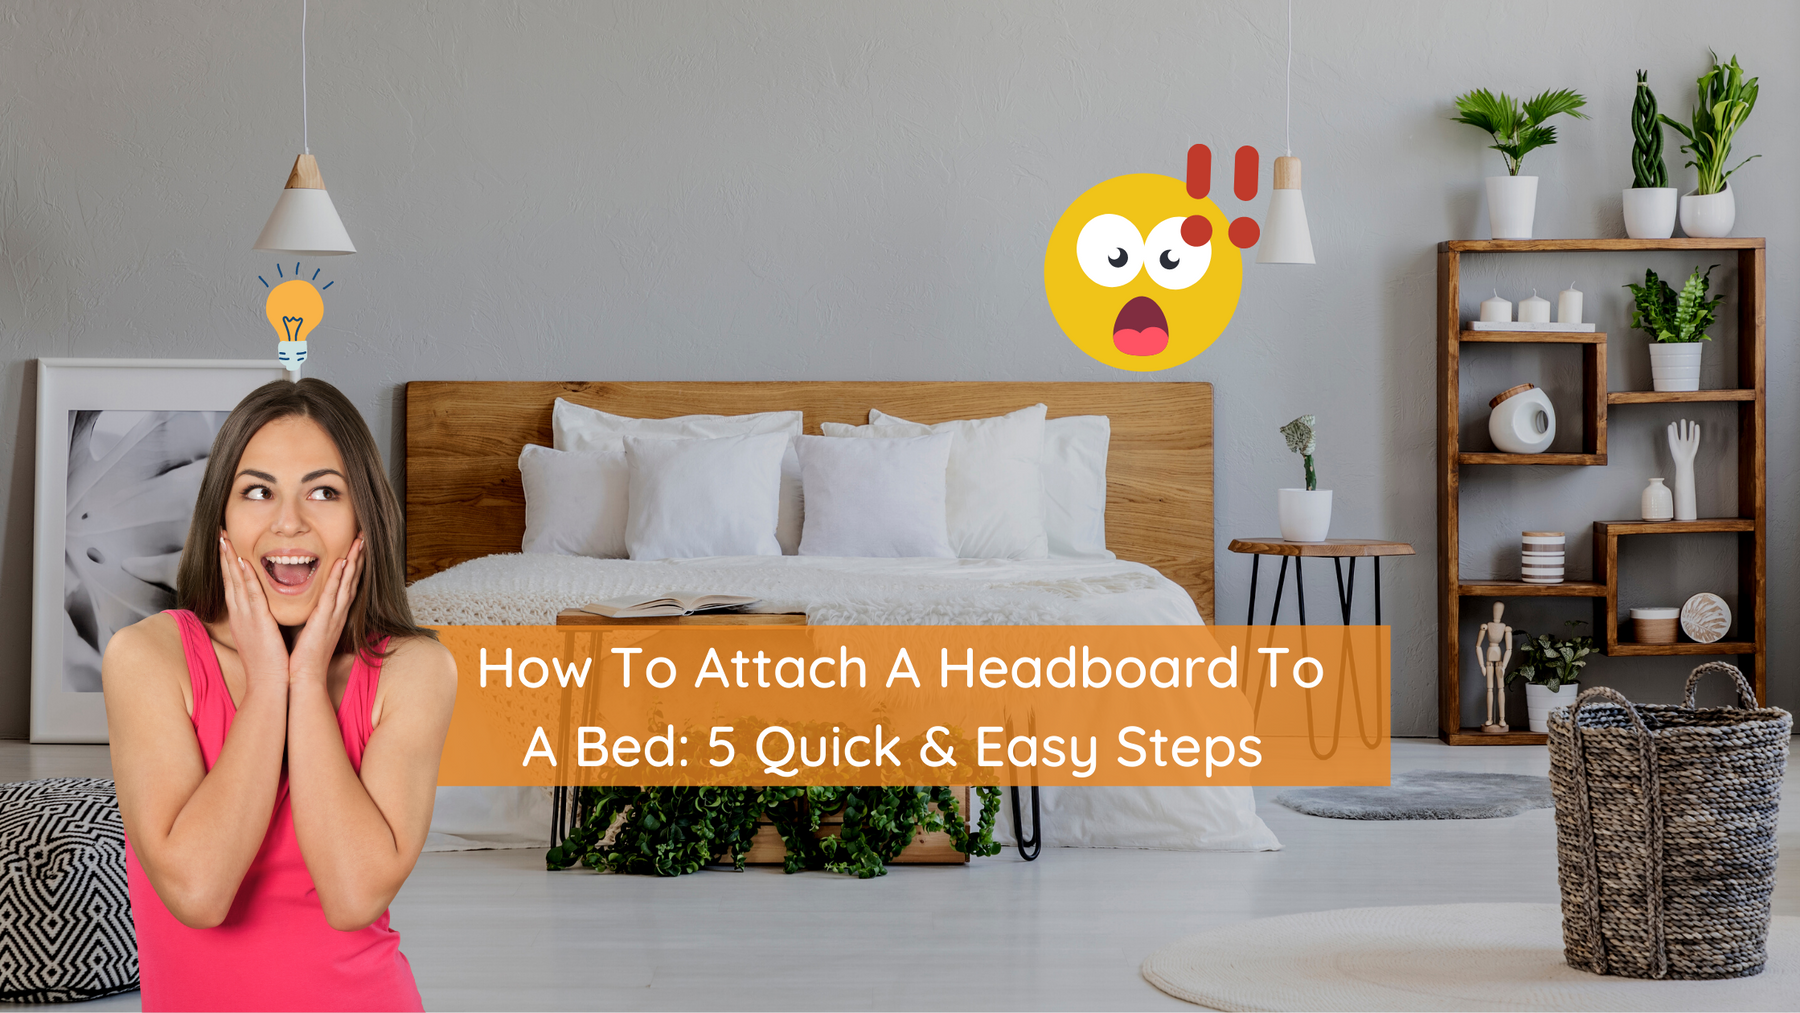 how to attach a headboard to a bed: 5 quick and easy steps - Mainland Furniture NZ